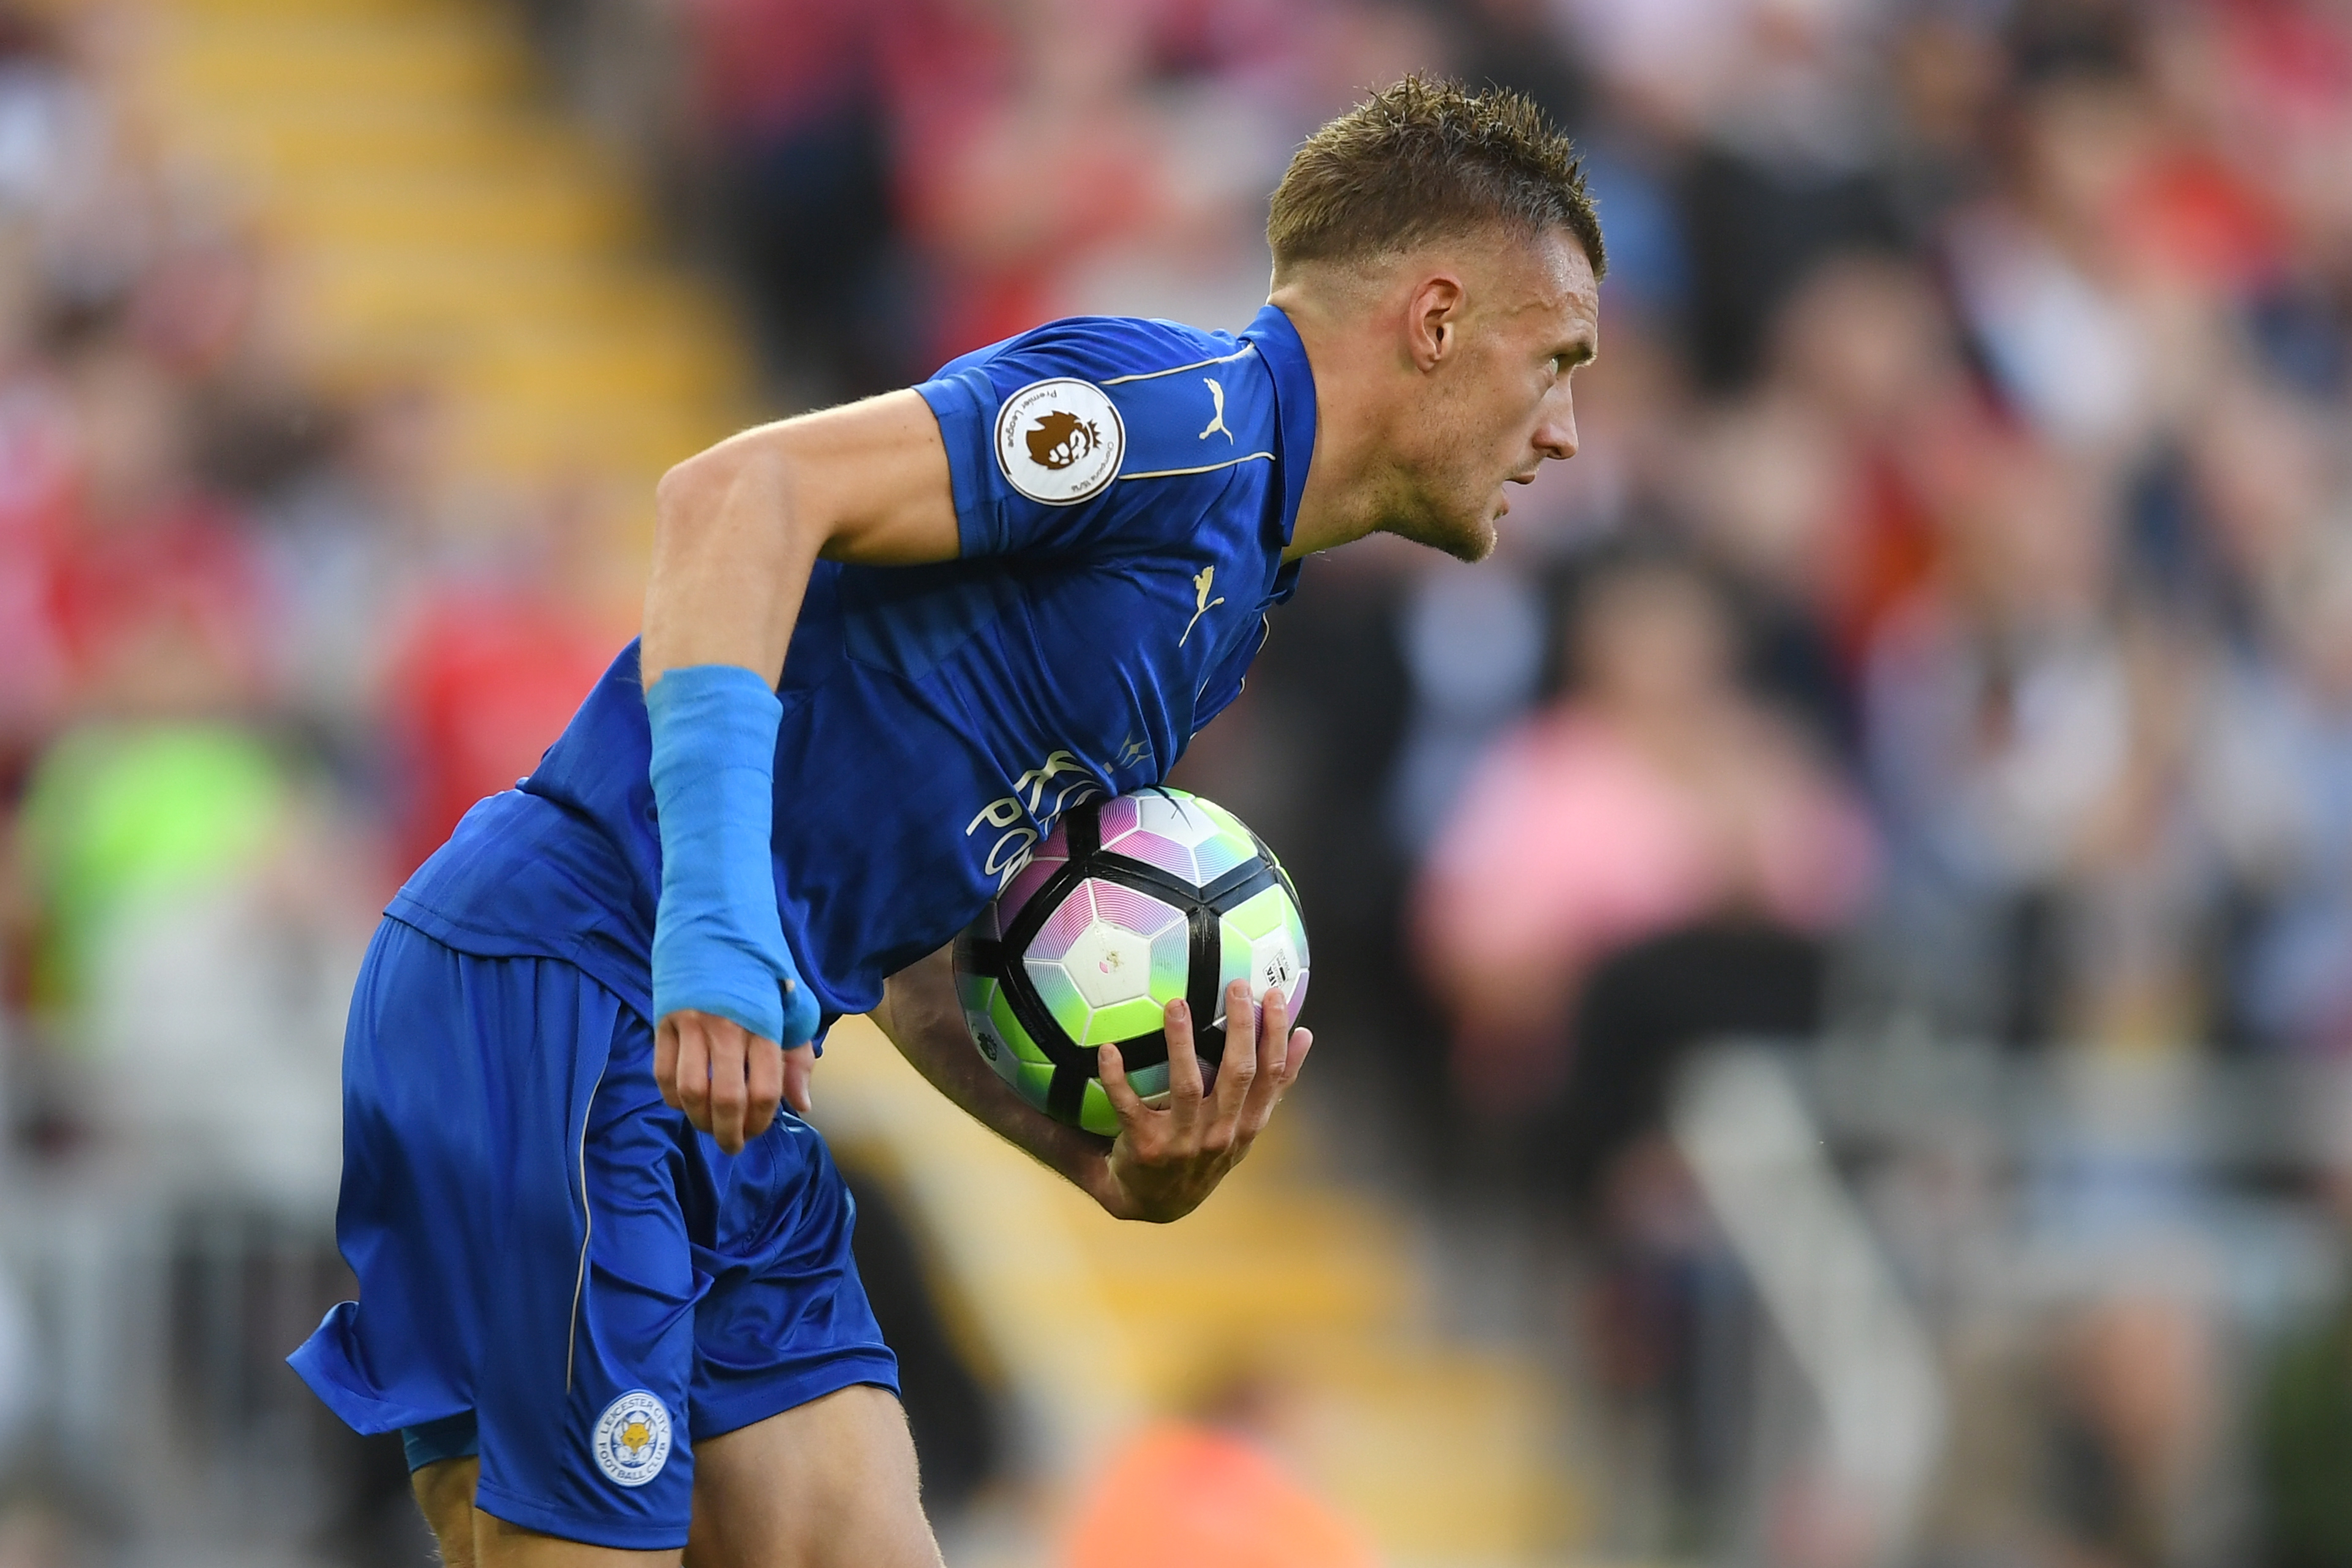 LIVERPOOL, ENGLAND - SEPTEMBER 10: Jamie Vardy of Leicester City grabs the ball after scoring his sides first goal during the Premier League match between Liverpool and Leicester City at Anfield on September 10, 2016 in Liverpool, England.  (Photo by Michael Regan/Getty Images)